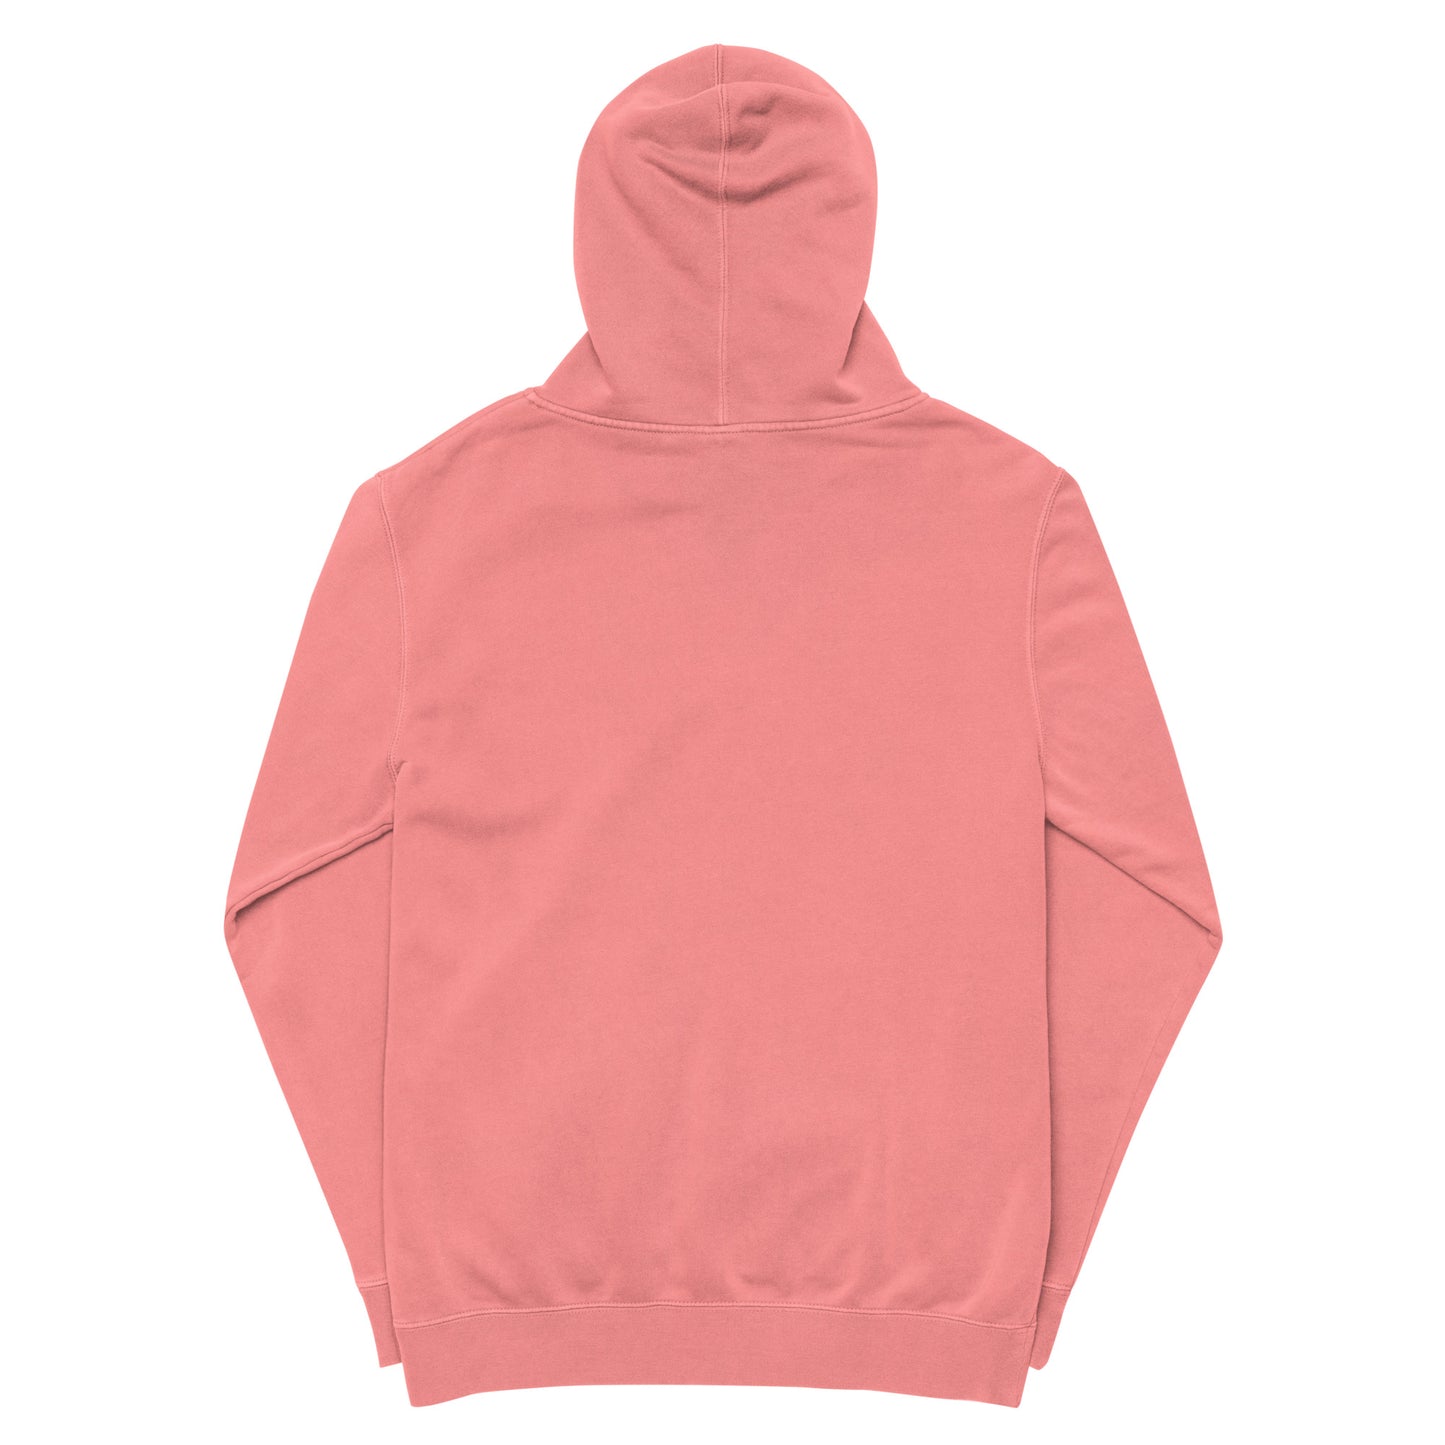 (New) KGE Unlid Pigment-Dyed Hoodie | Independent Trading Co